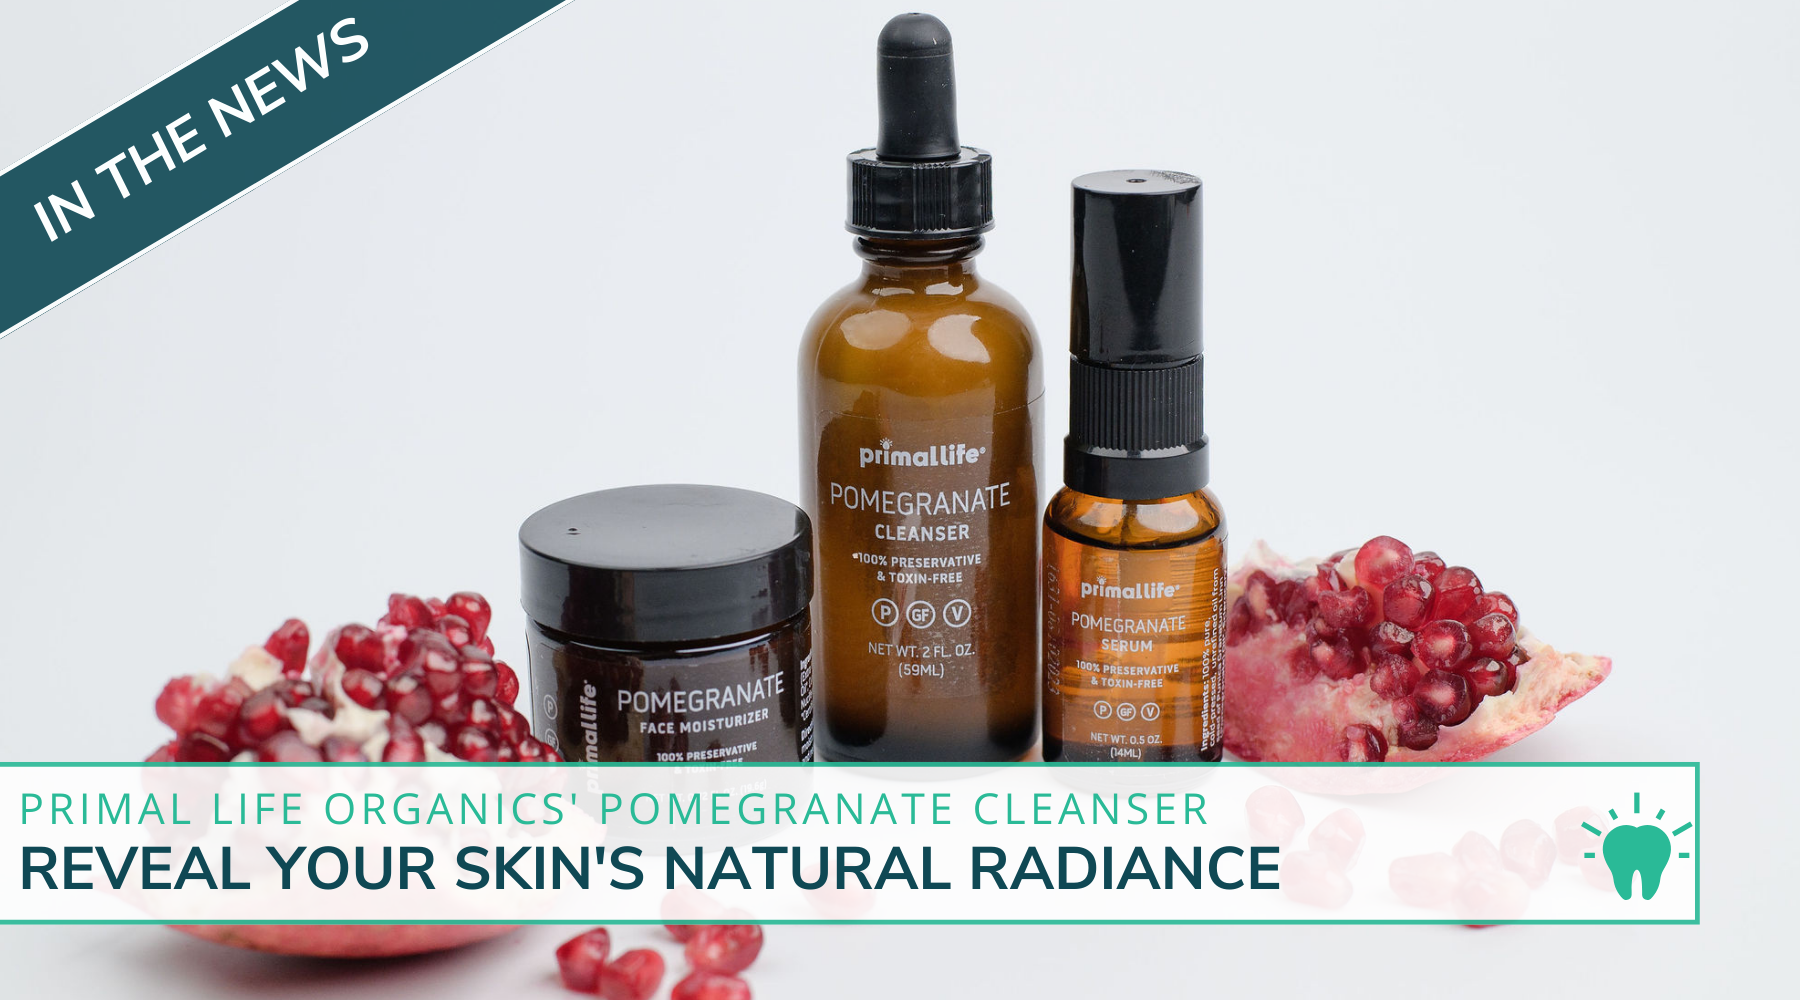 Reveal Your Skin's Natural Radiance With Primal Life Organics' Pomegranate Cleanser